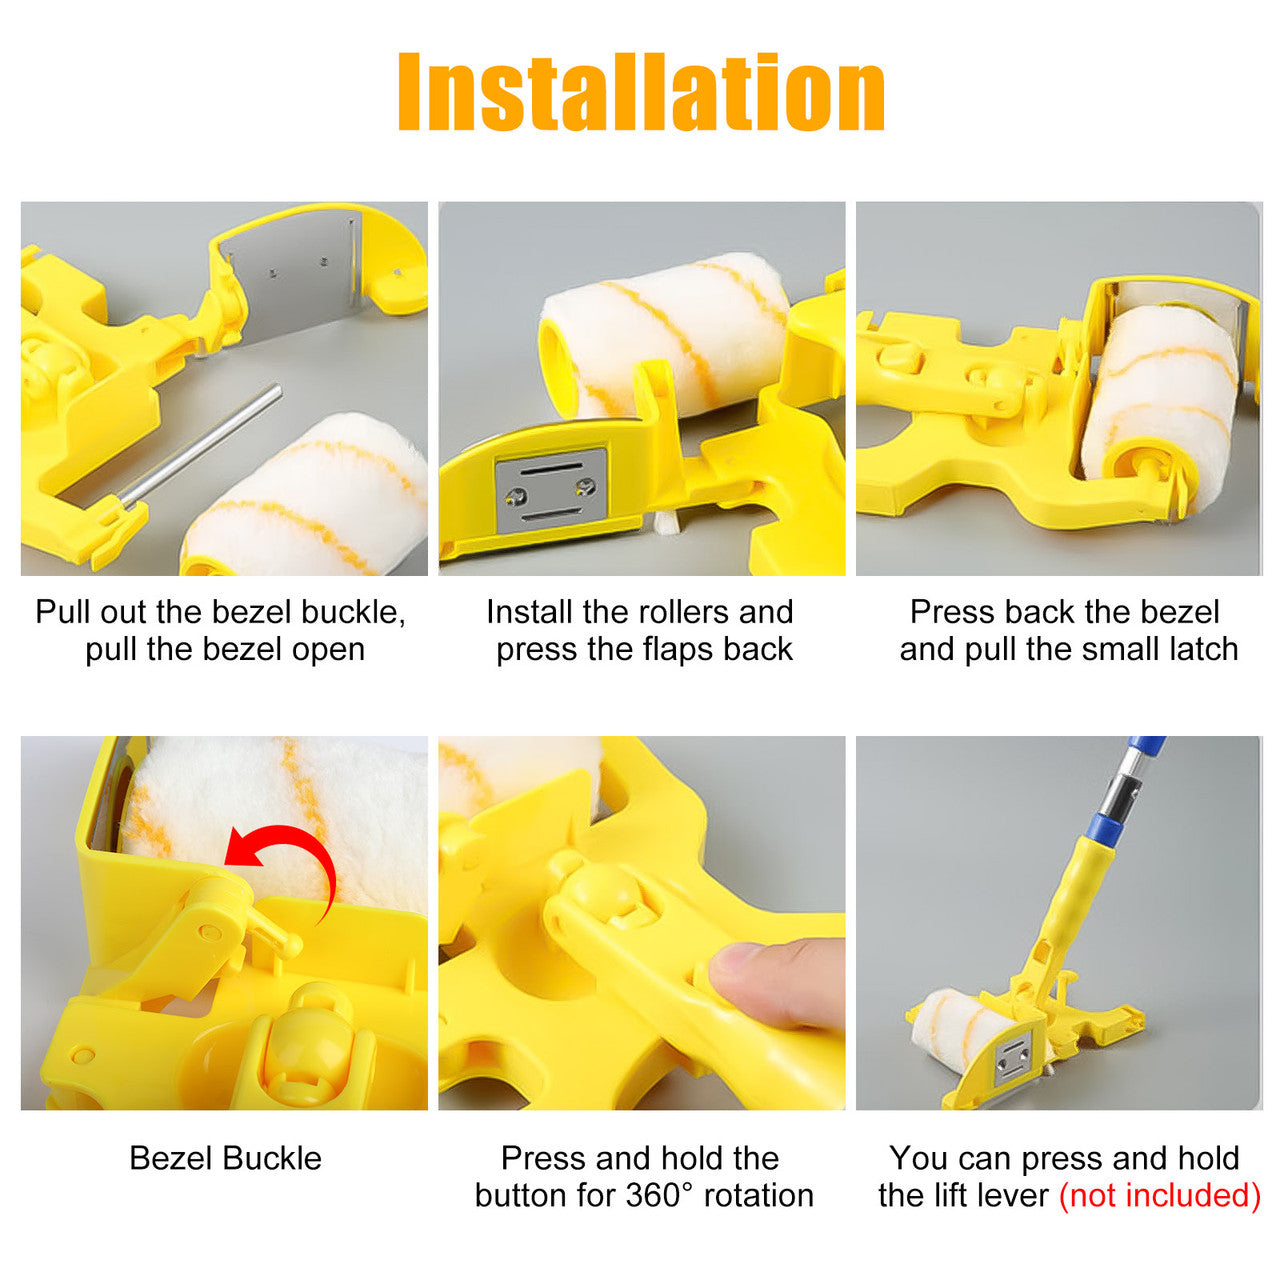 Multifunctional Hand held Paint Roller Brush - with Roller and Brush Portable Tool for Home Room Wall Ceiling Painting (Yellow)